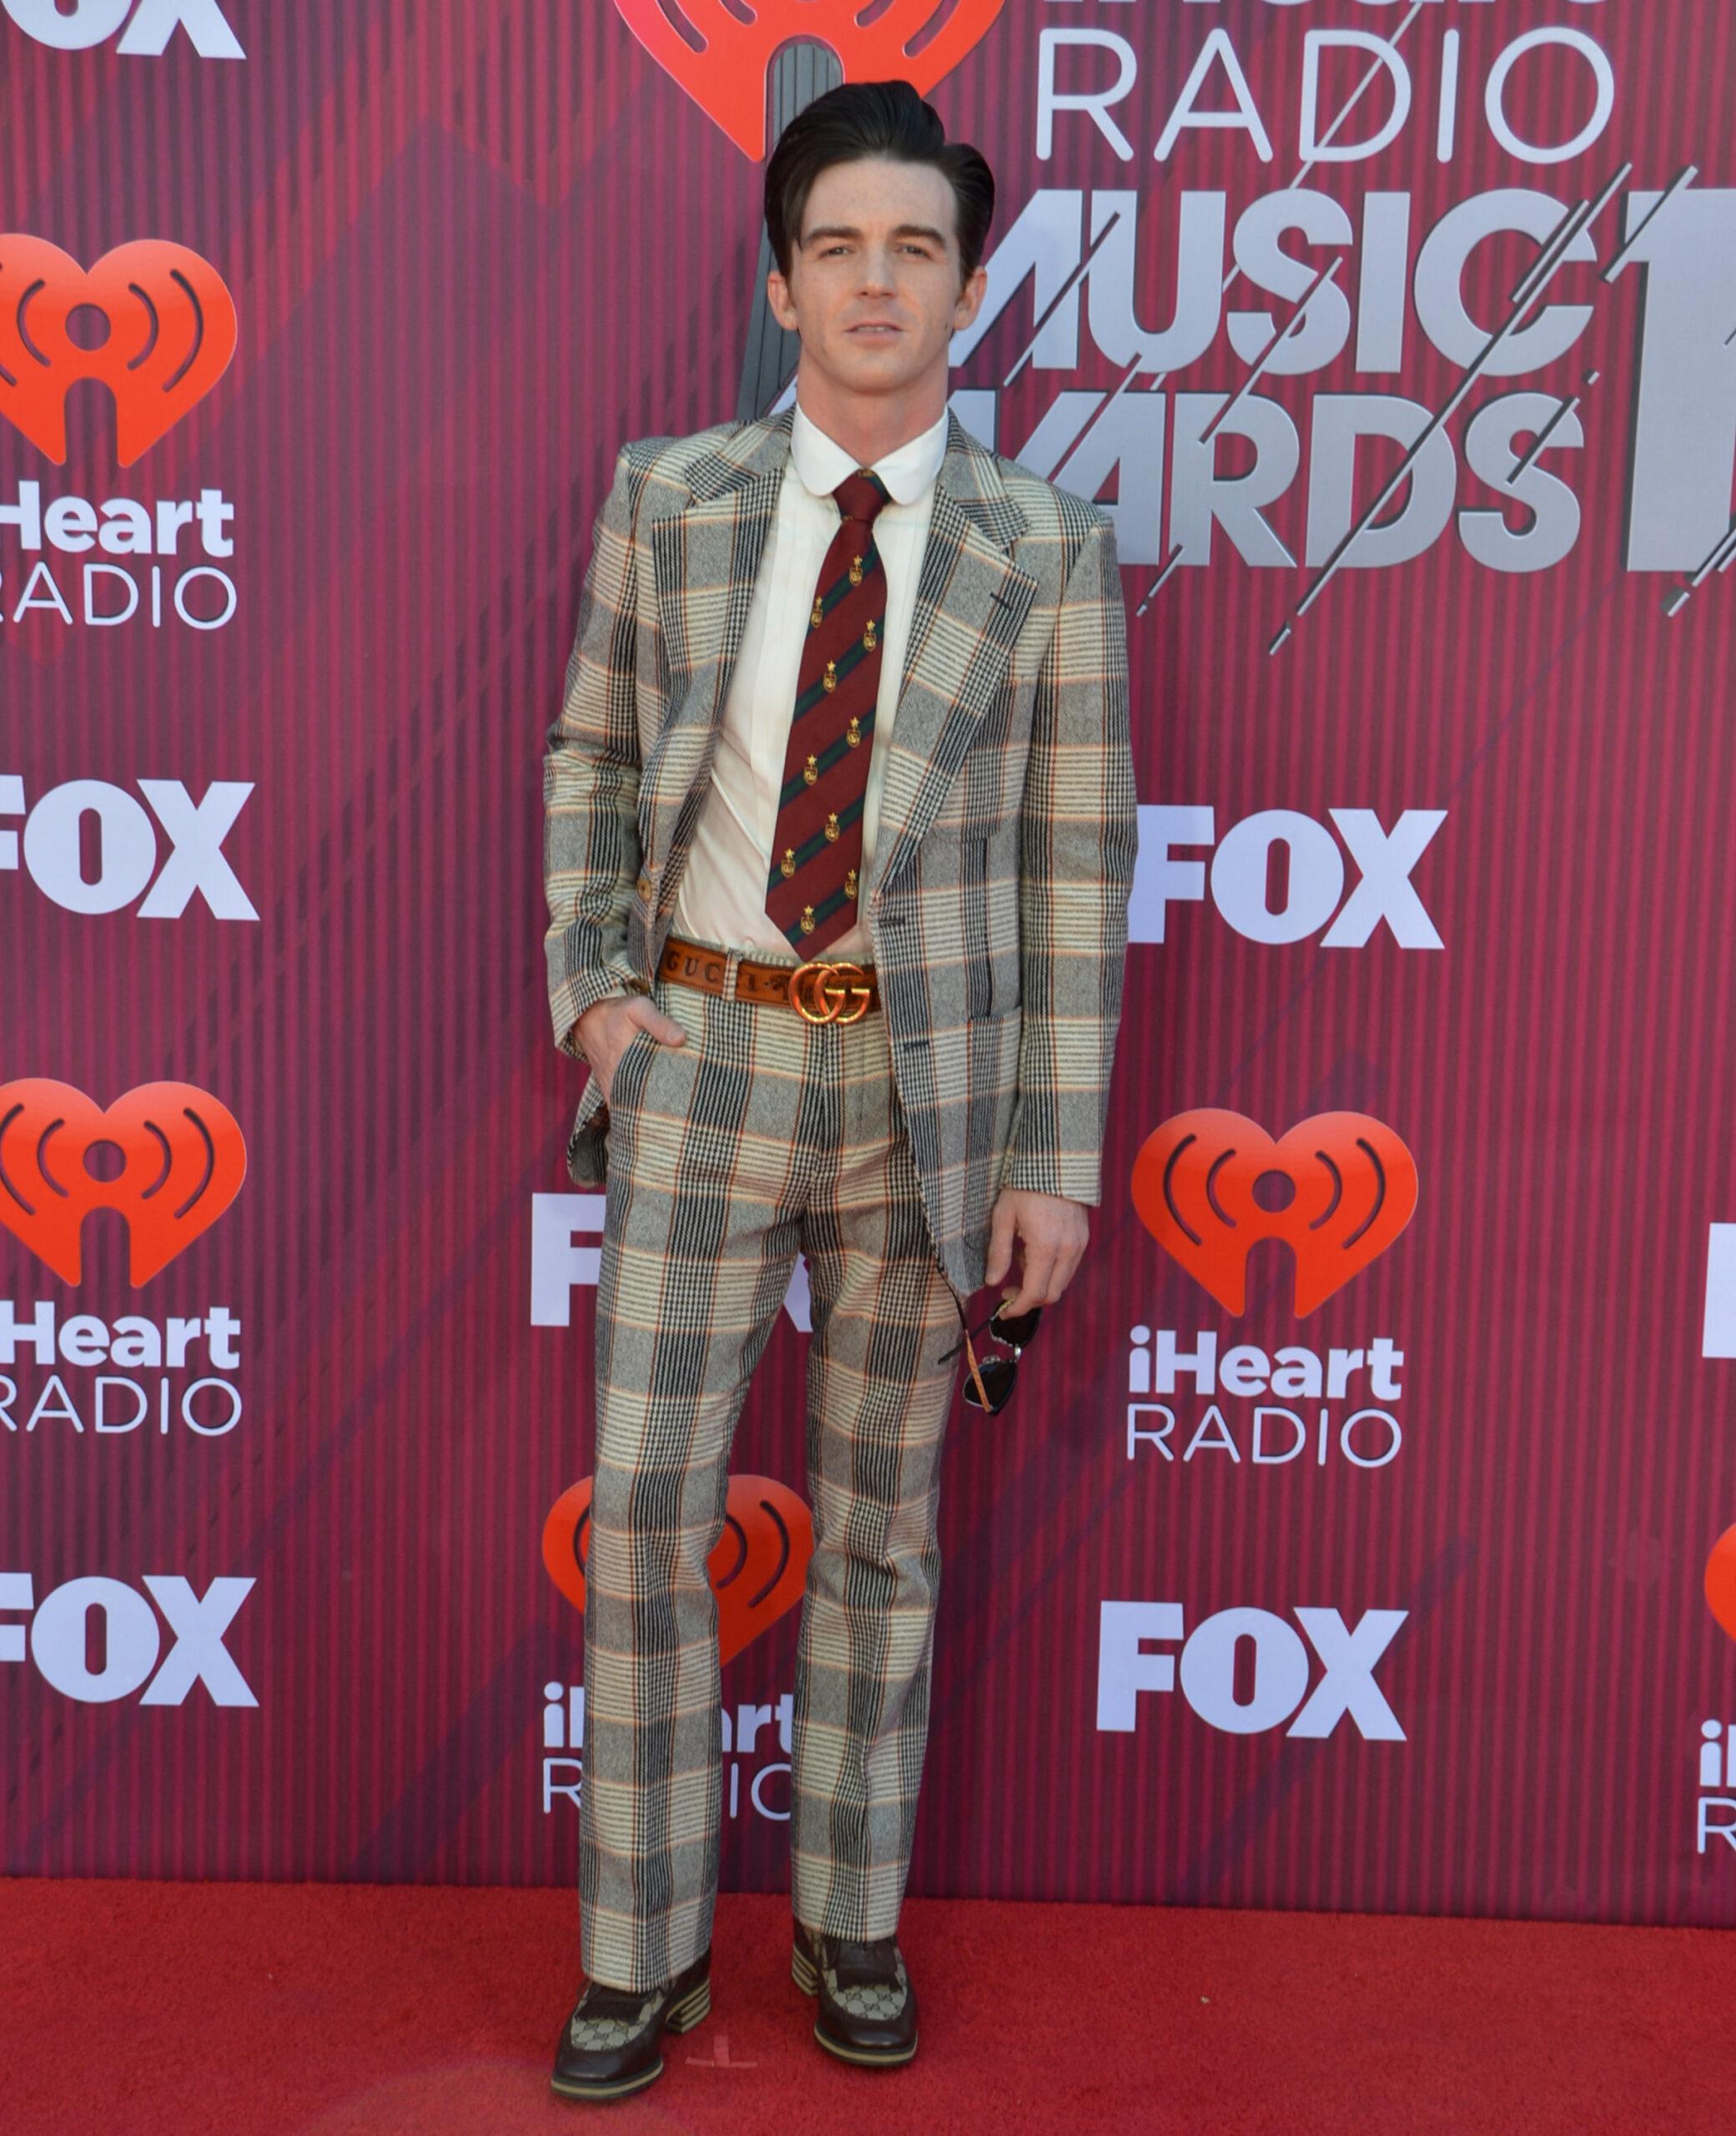 Drake Bell Is Reported 'Missing And Endangered', Cops Worried For His Safety